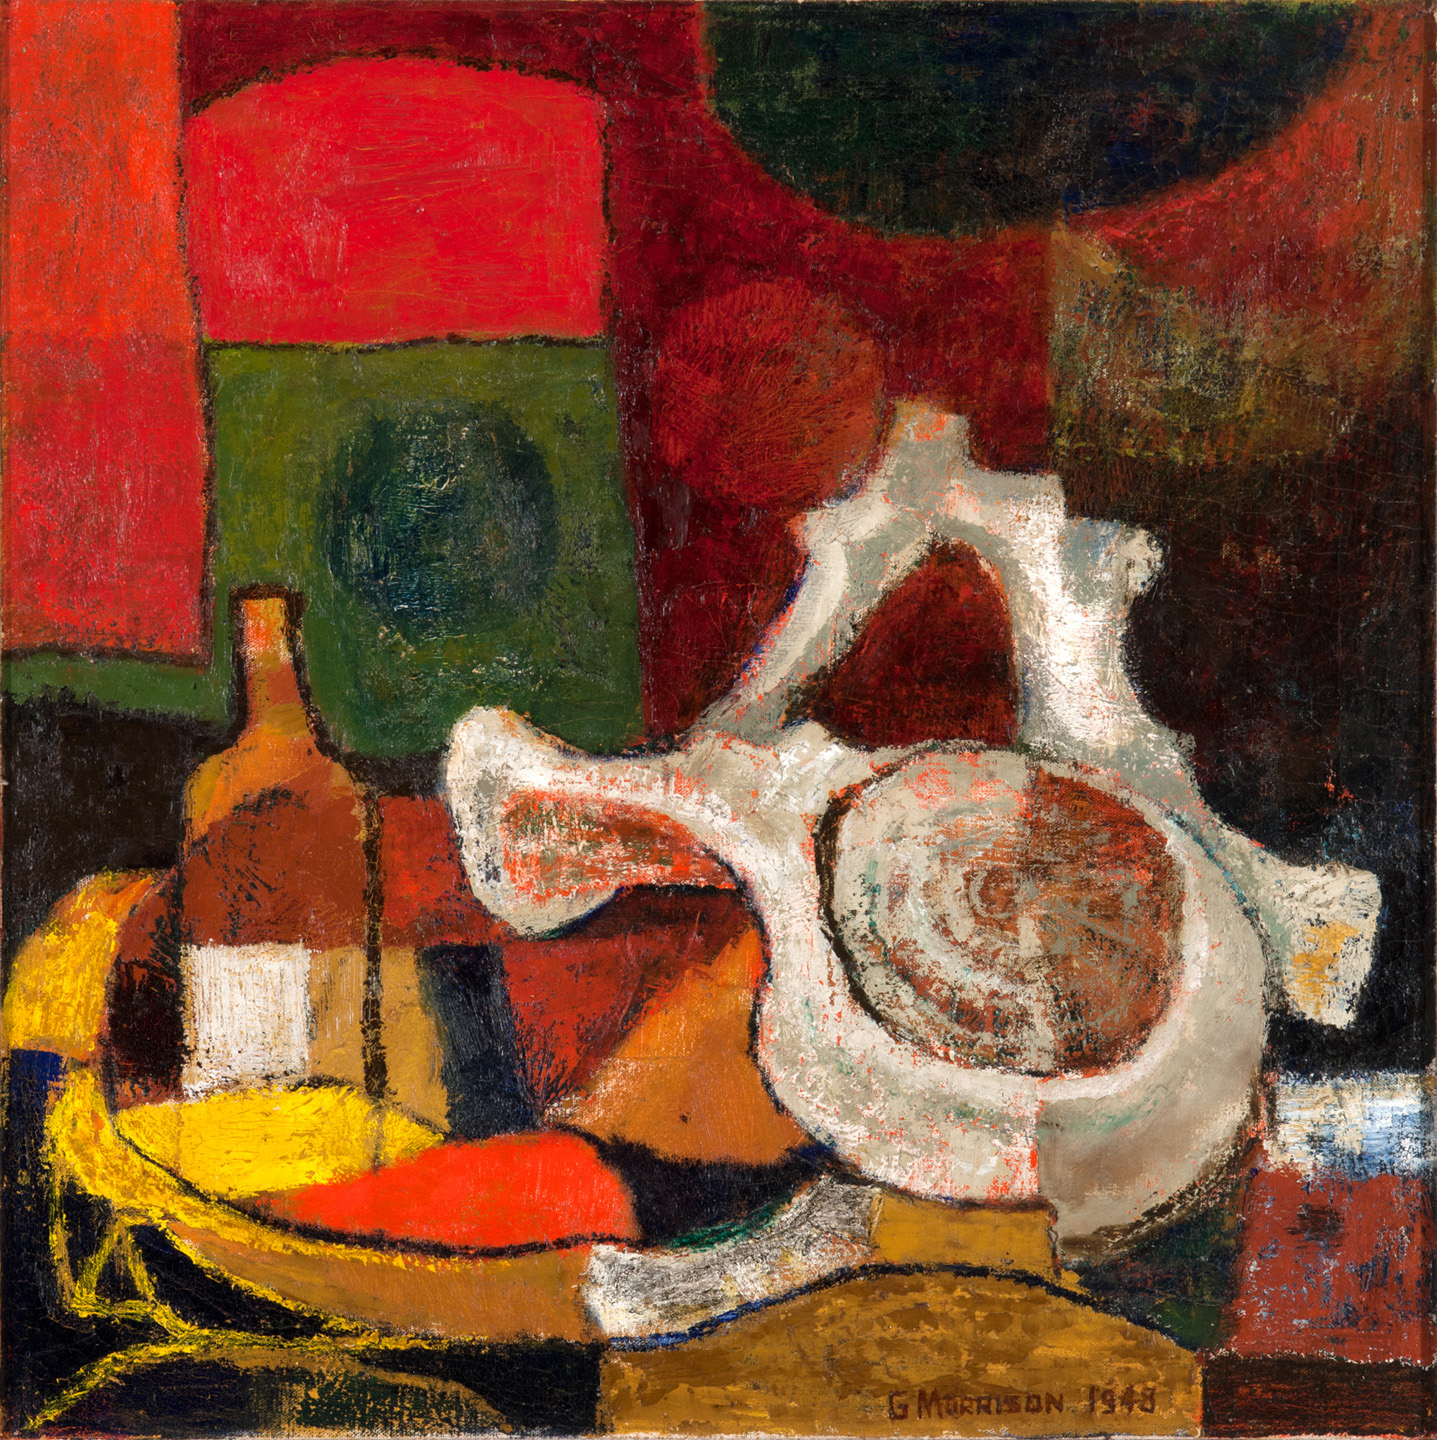 Whalebone, 1948
oil on canvas
25 x 24.75 inches
private collection